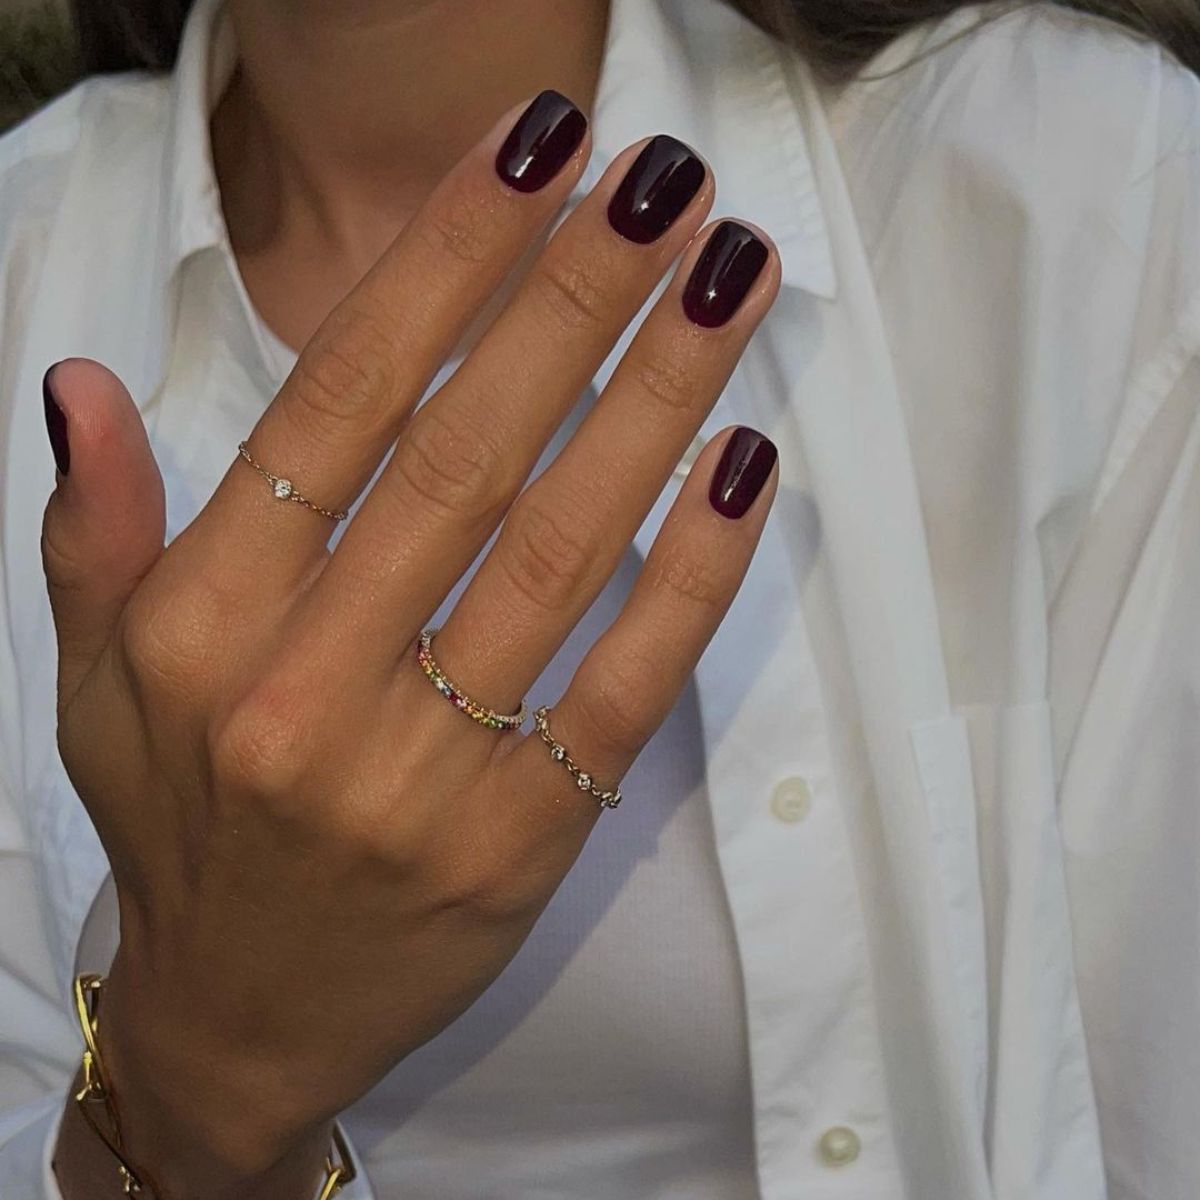 Black Cherry' nails look so classy and expensive - here are 6 ways to wear  the shade this winter - Yahoo Sports